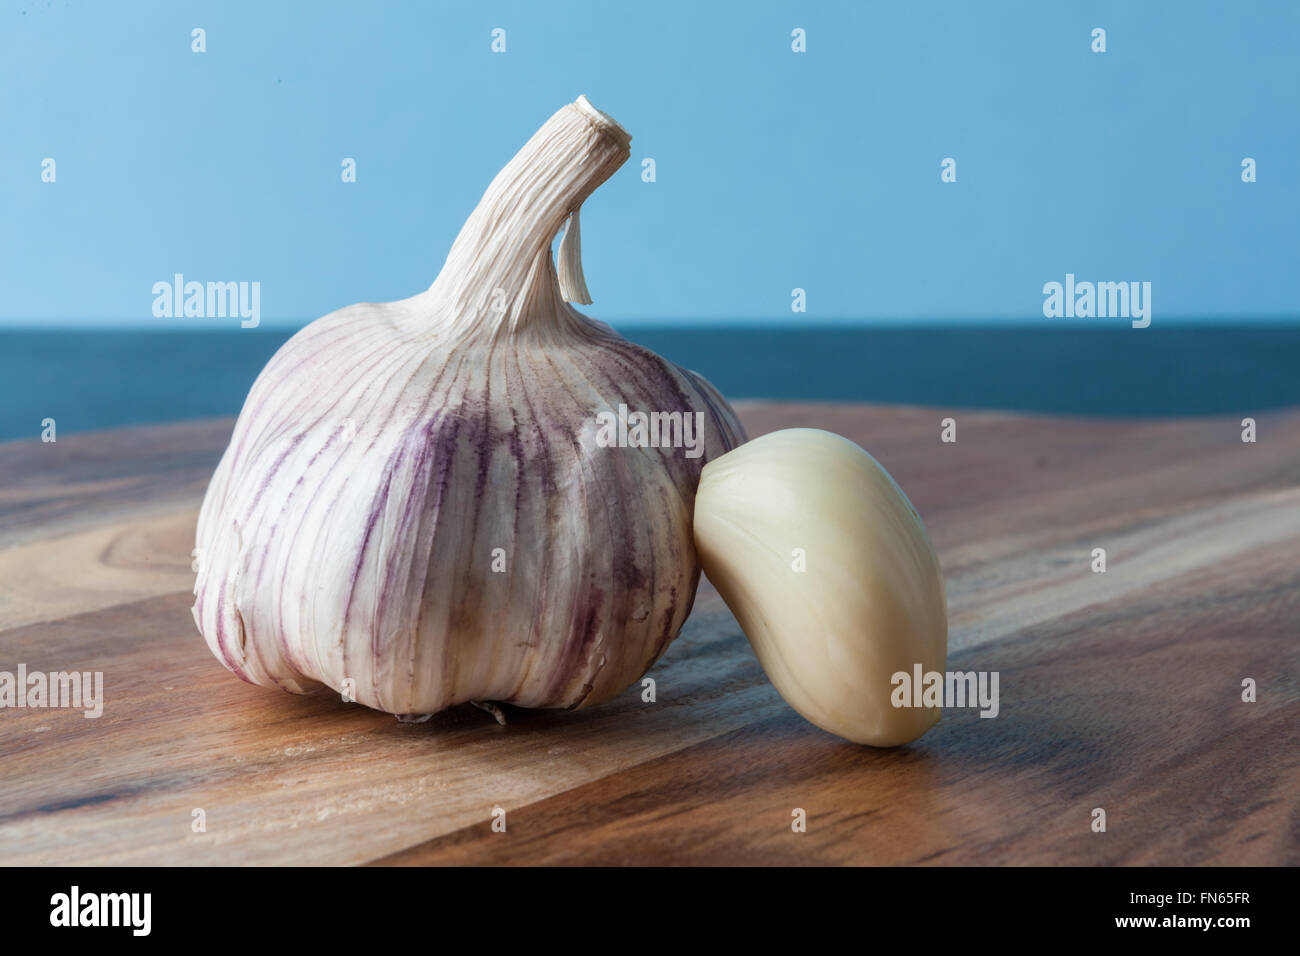 Closeup of peeled garlic clove and whole garlic on wooden chopping board with copy space. Stock Photo